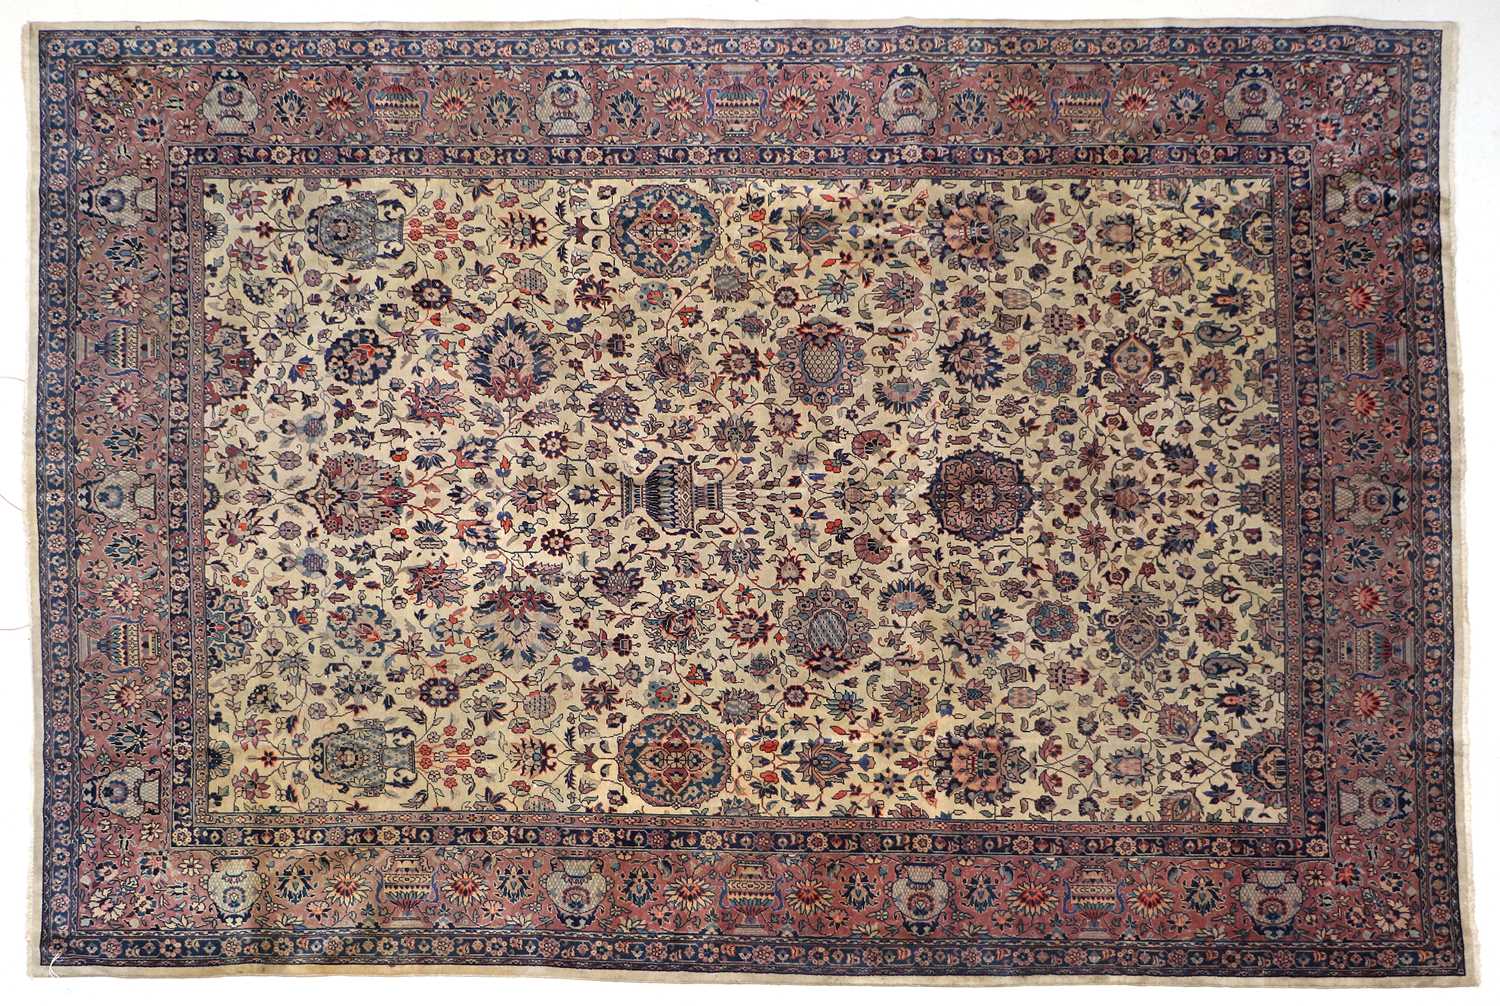 Tabriz Carpet North West Iran, circa 1930 The ivory ground with an allover one-way design of large